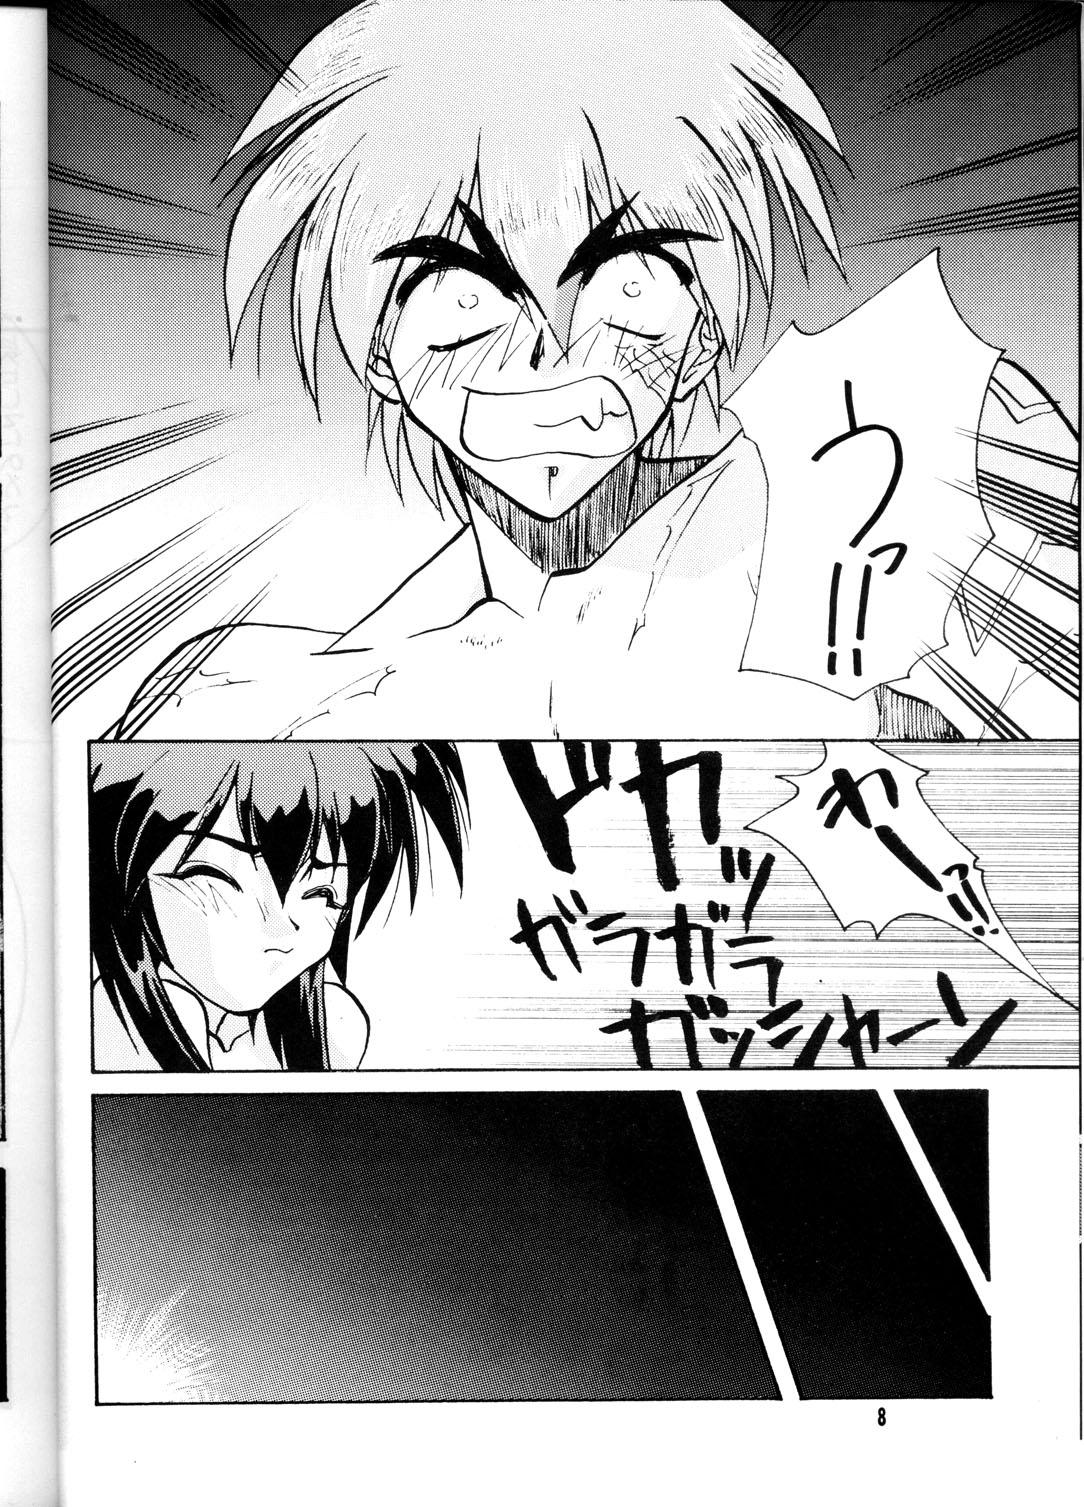 Uncensored OUTLAW STAR - Slayers Outlaw star All purpose cultural cat girl nuku nuku Dad - Page 7